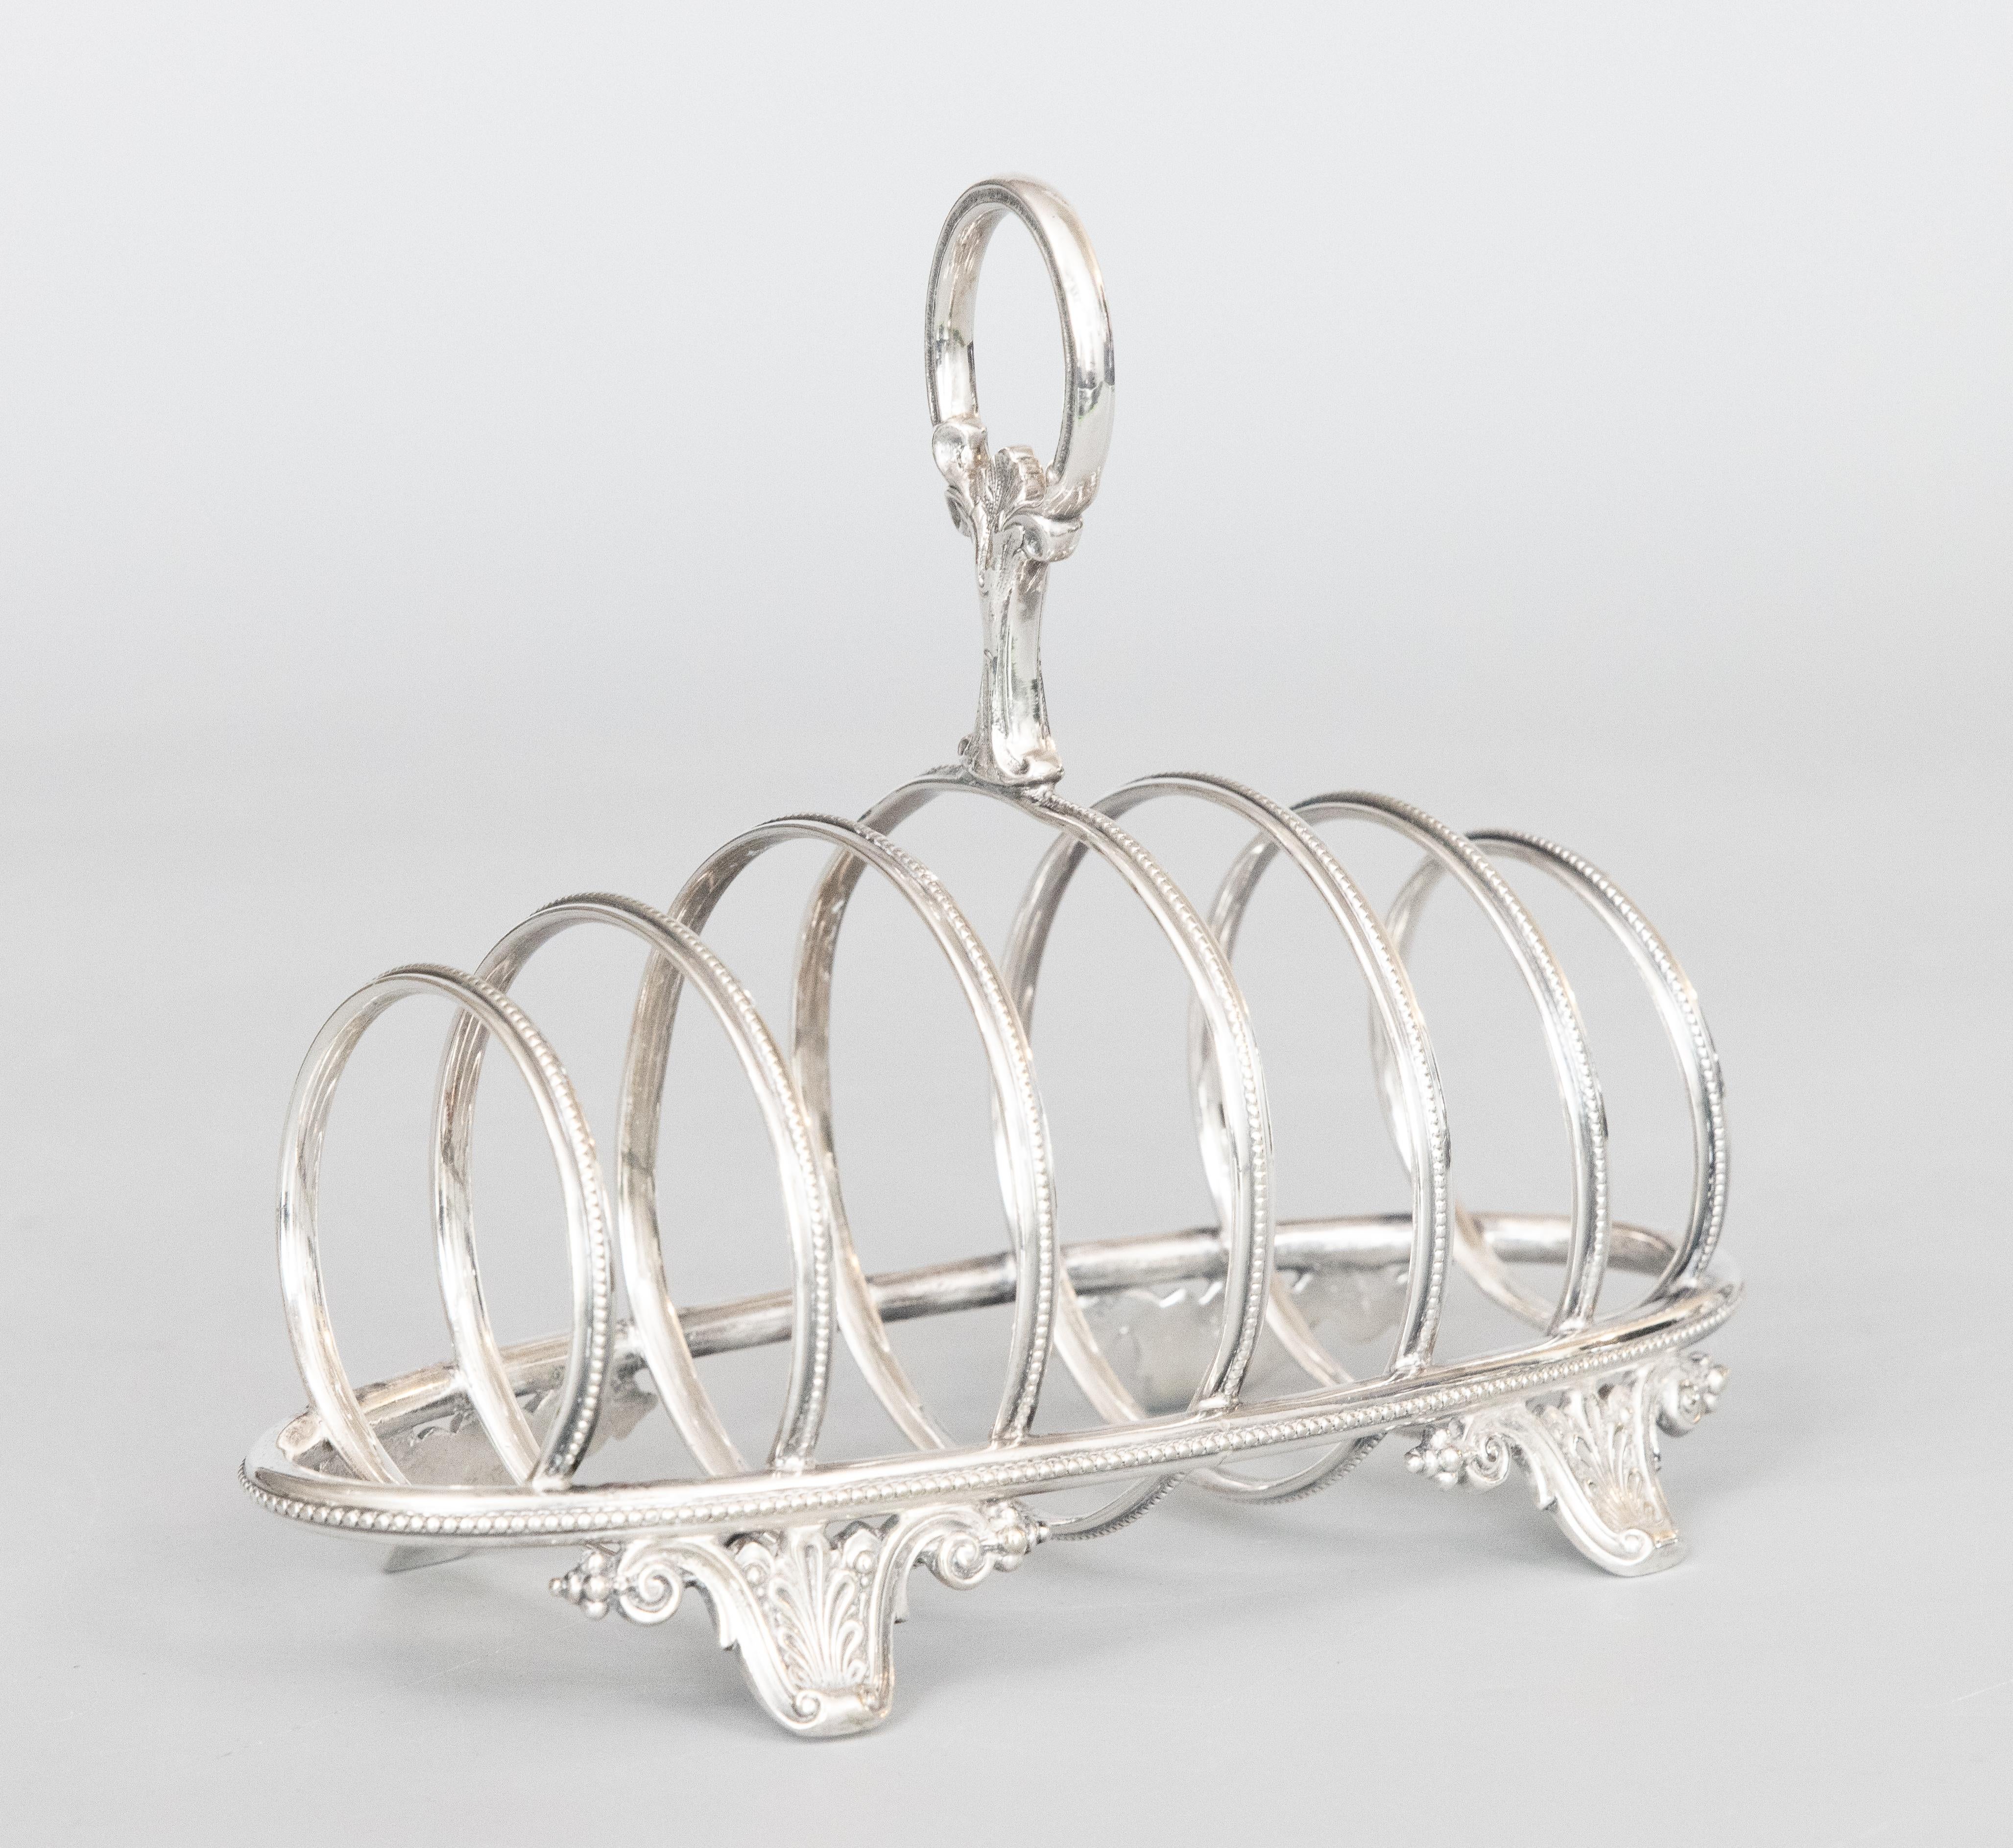 A fine Art Deco English silverplate six slot toast rack, circa 1900. No maker's mark. This stunning toast rack has a sleek and stylish barrel shaped geometric design, beaded trim, and ornate acanthus leaf feet and finial. It's perfect for serving